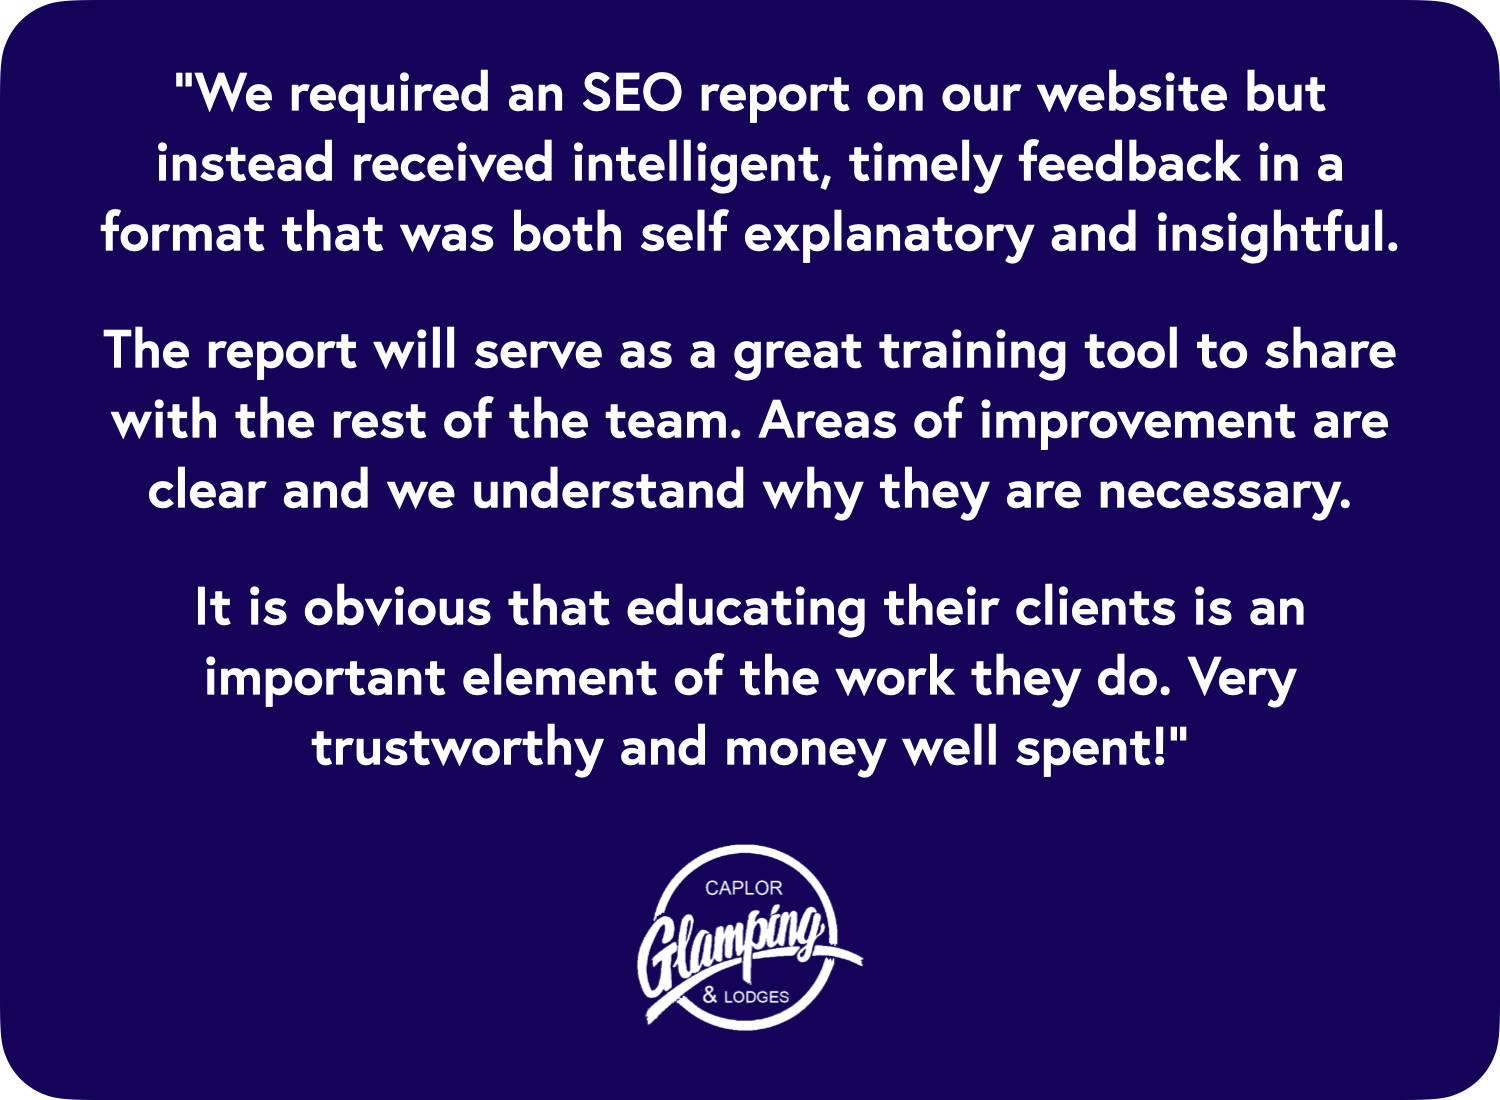 “We required an SEO report on our website but in stead received intelligent, timely feedback in a format that was both self explanatory and insightful. The report will serve as a great training tool to share with the rest of the team. Areas of improvement is clear and we understand why they are necessary. It is obvious that educating their clients is an important element of the work they do. Very trustworthy and money well spent!”